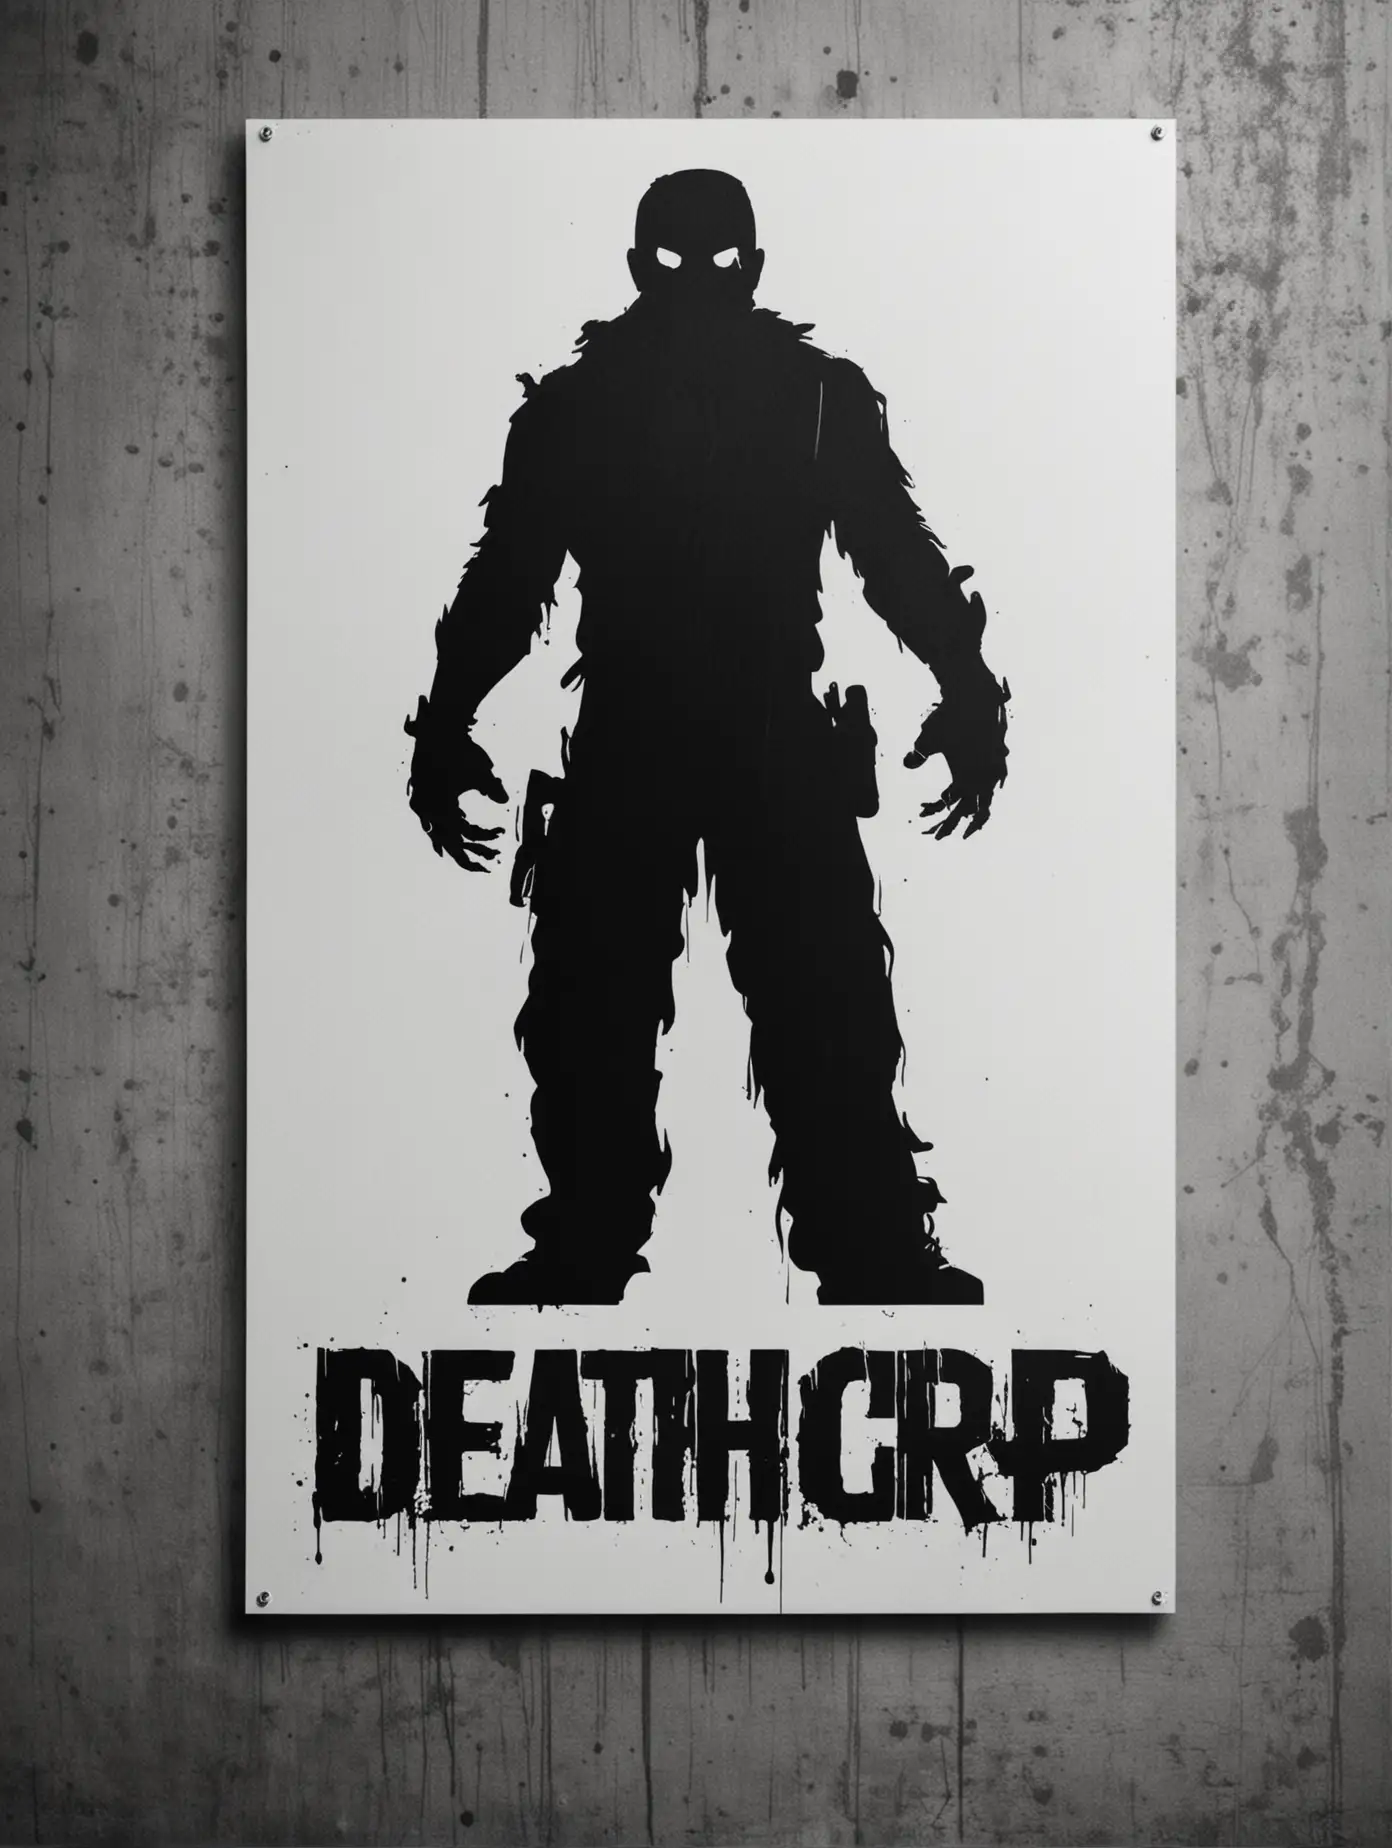 stencil, minimalist, simple, vector art, black and white, silhouette, negative space, grindhouse movie poster, "Death Grip" monster